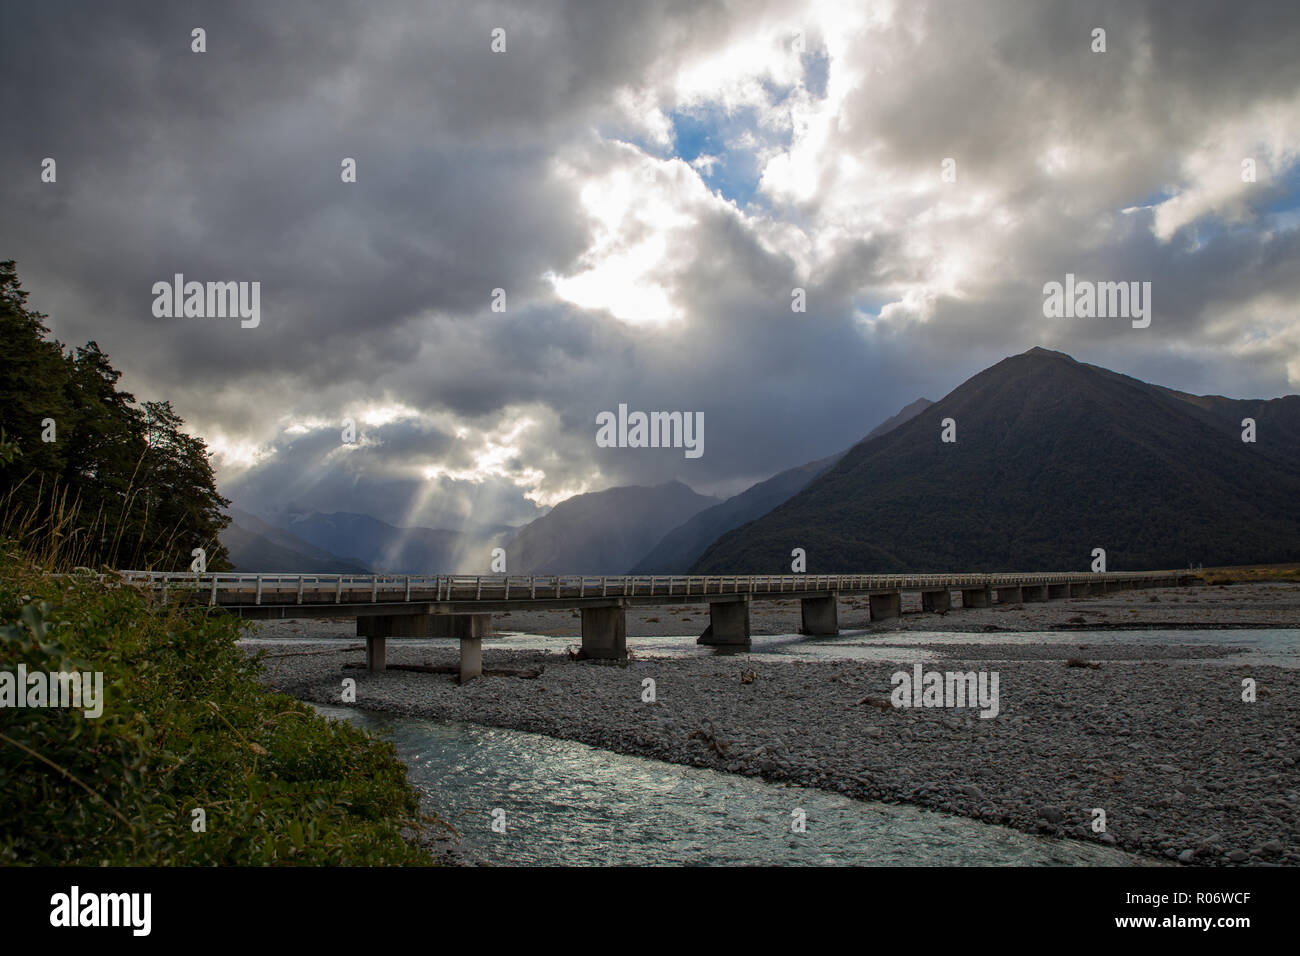 A long bridge crosses over a braided river in an alpine valley, Canterbury, New Zealand Stock Photo